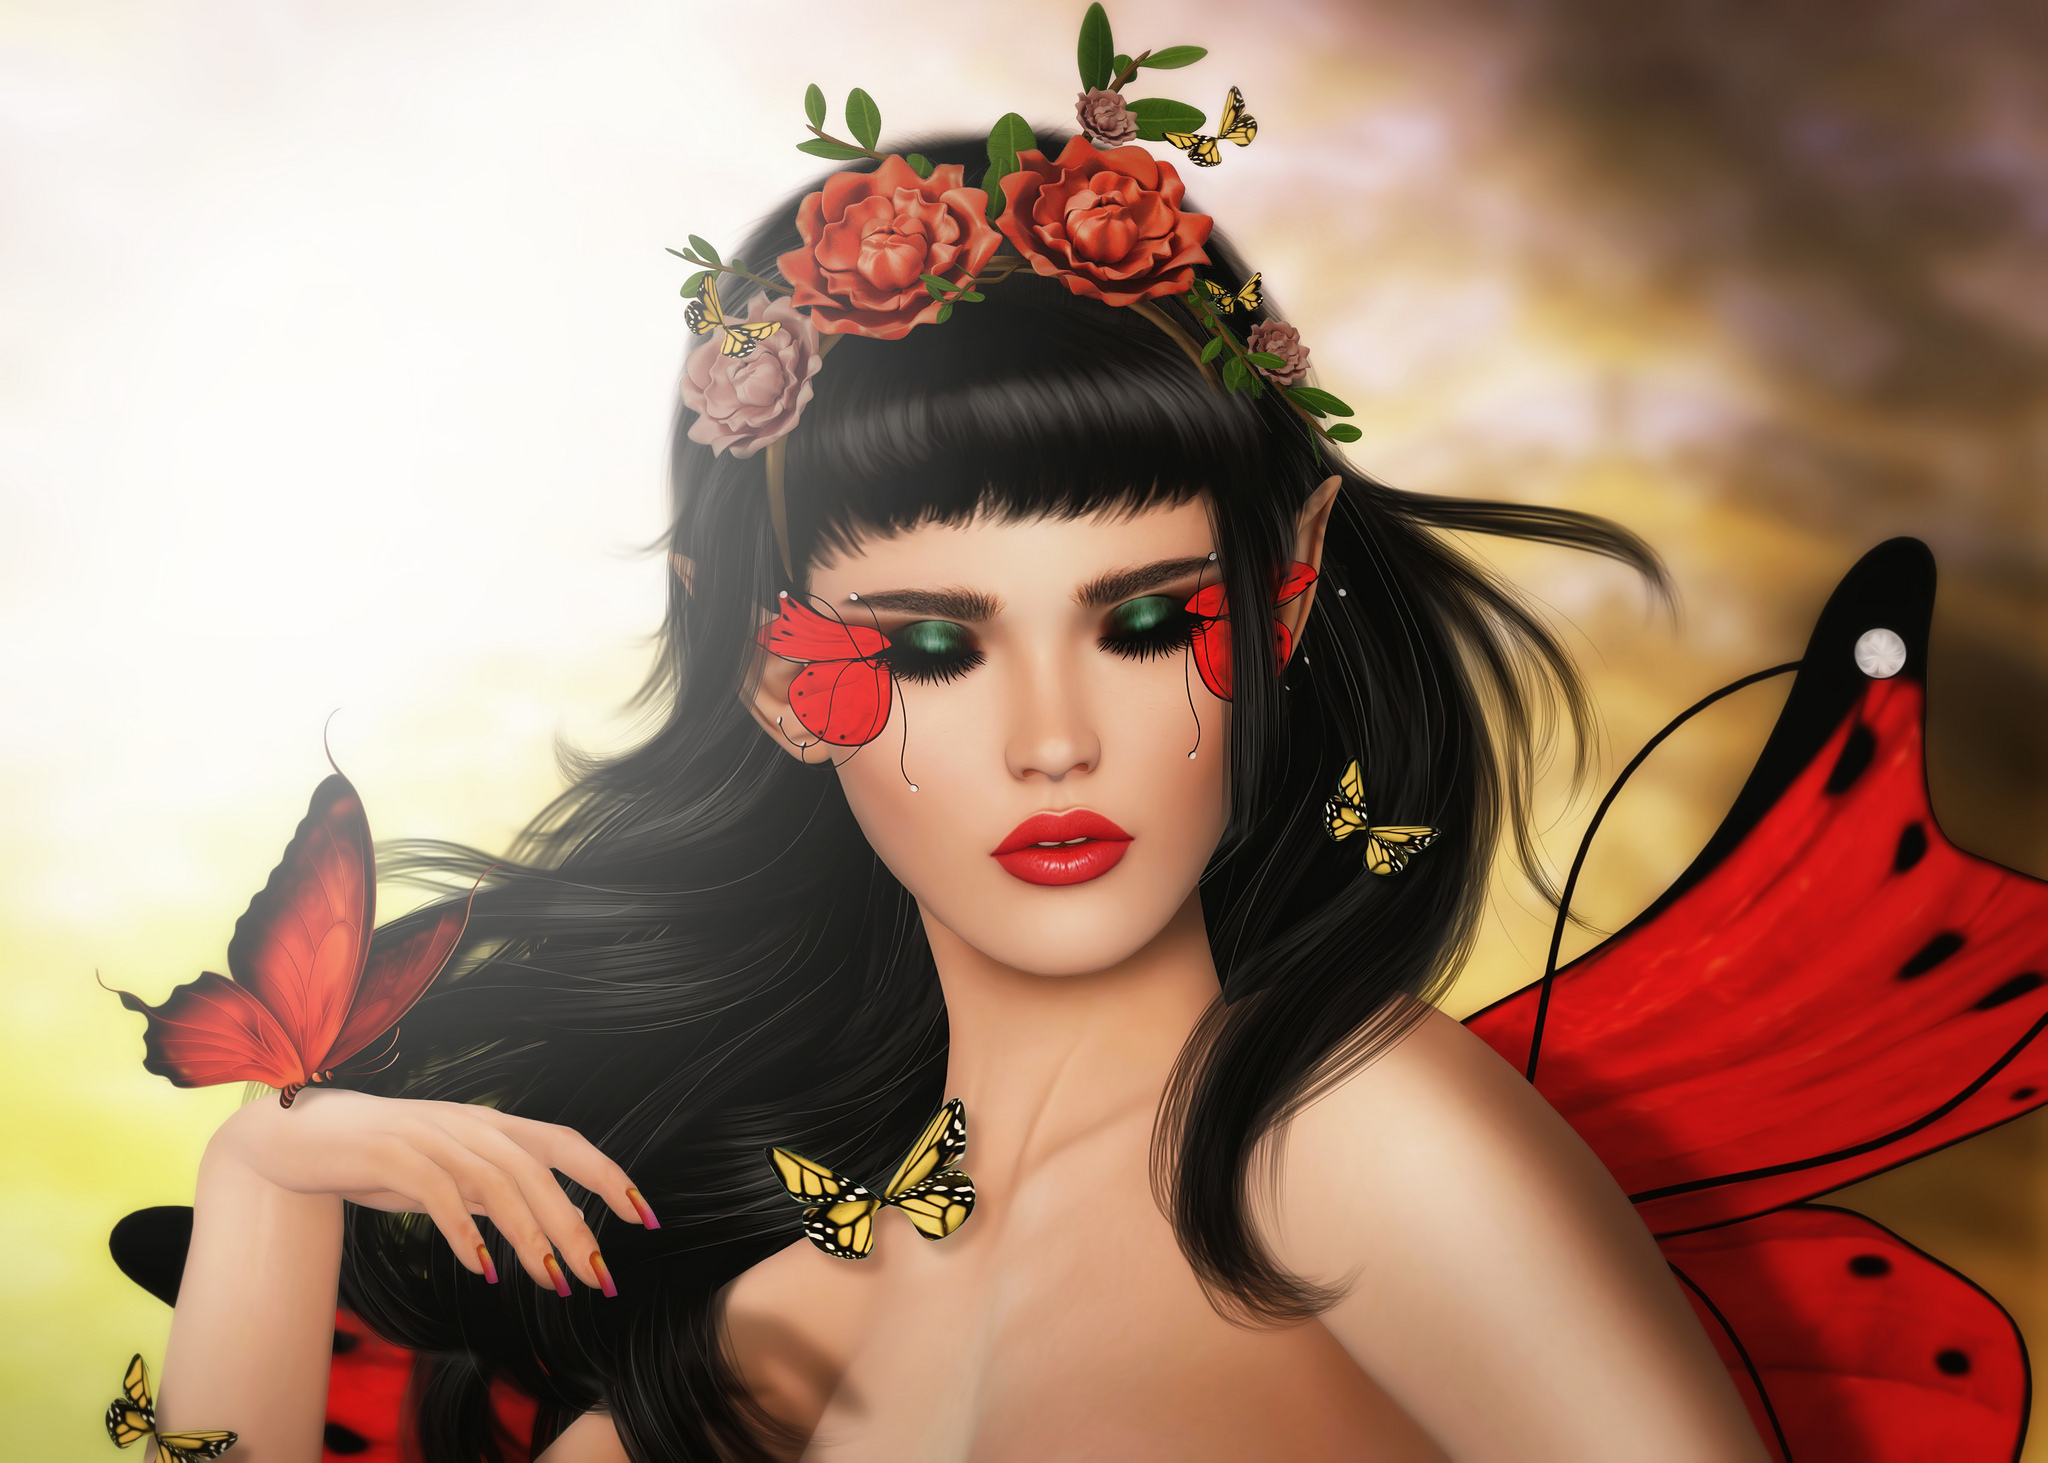 Butterfly Fantasy Girl Hd Wallpaper Background Image 2048x1463 5054